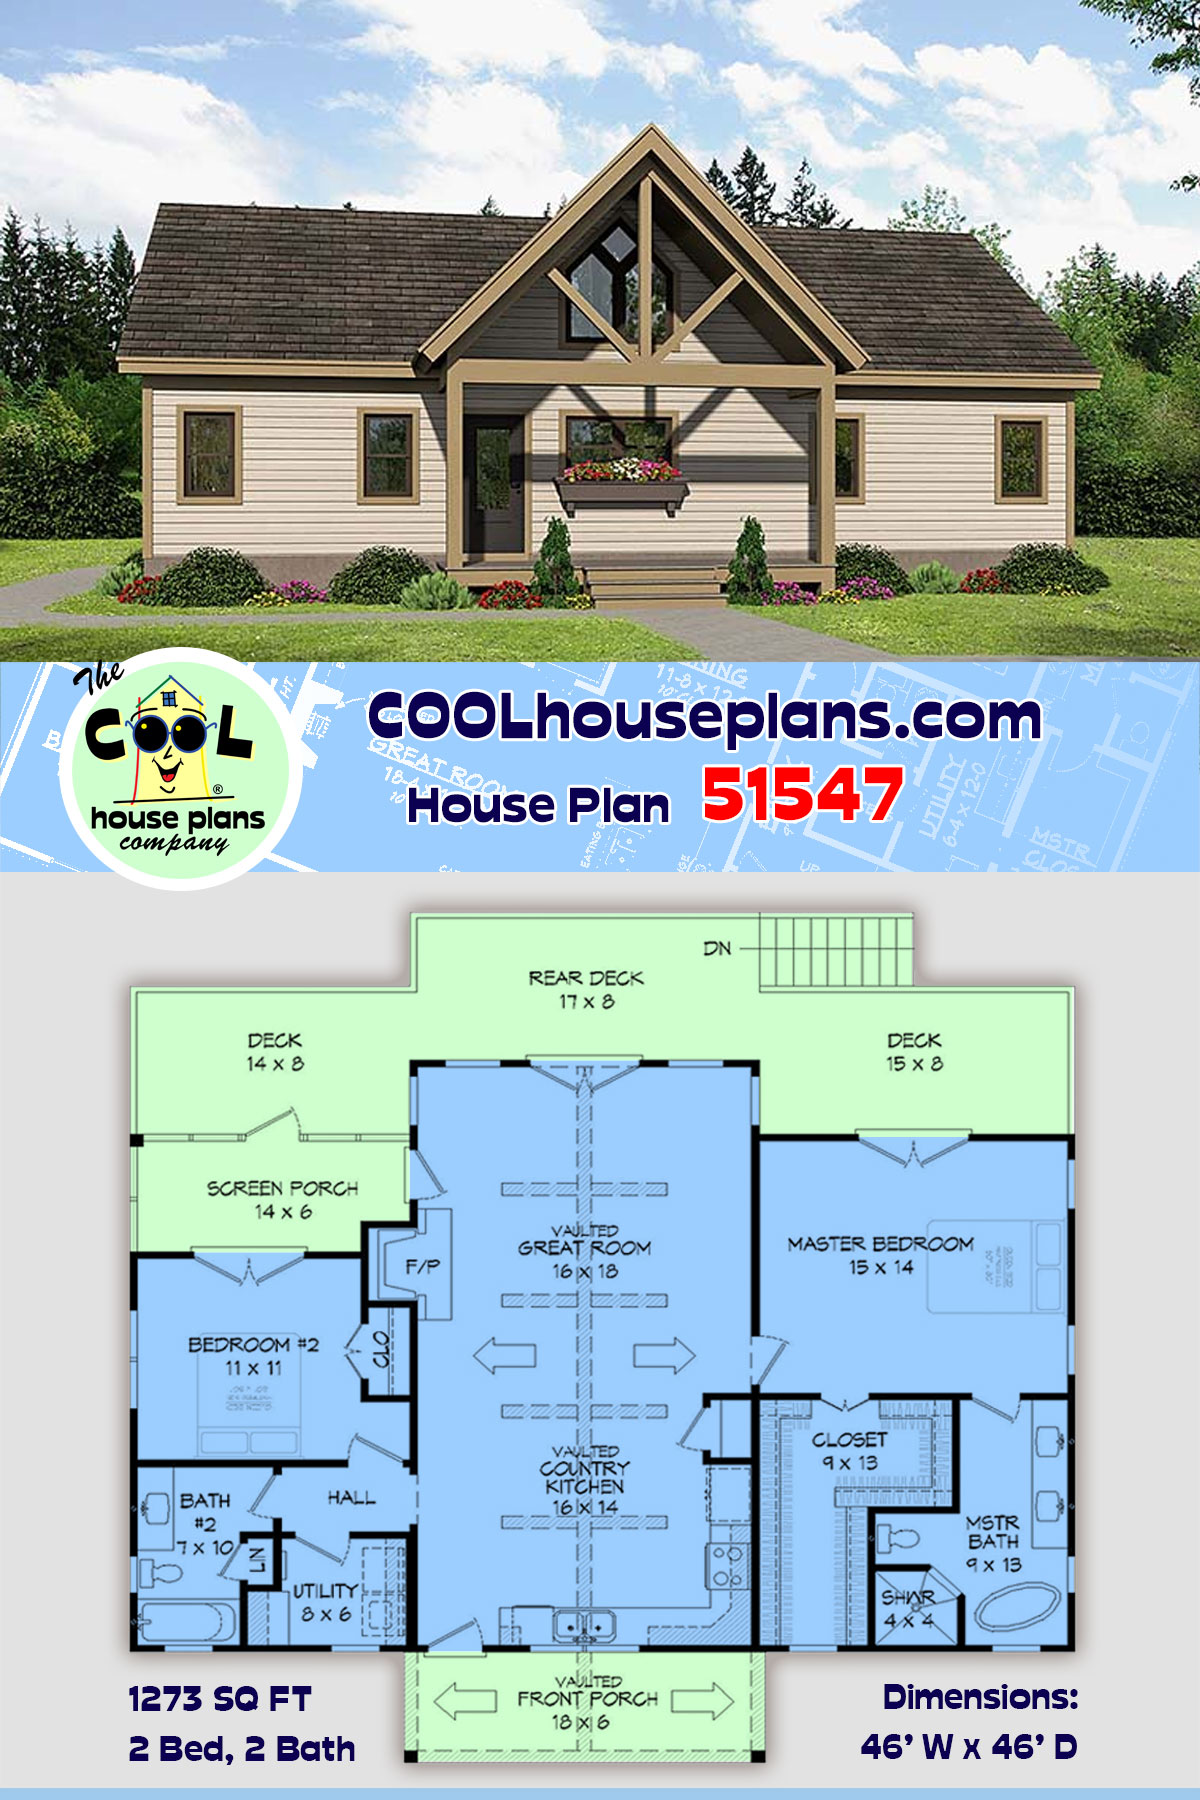 Cabin, Contemporary, Southern, Traditional House Plan 51547 with 2 Beds, 2 Baths